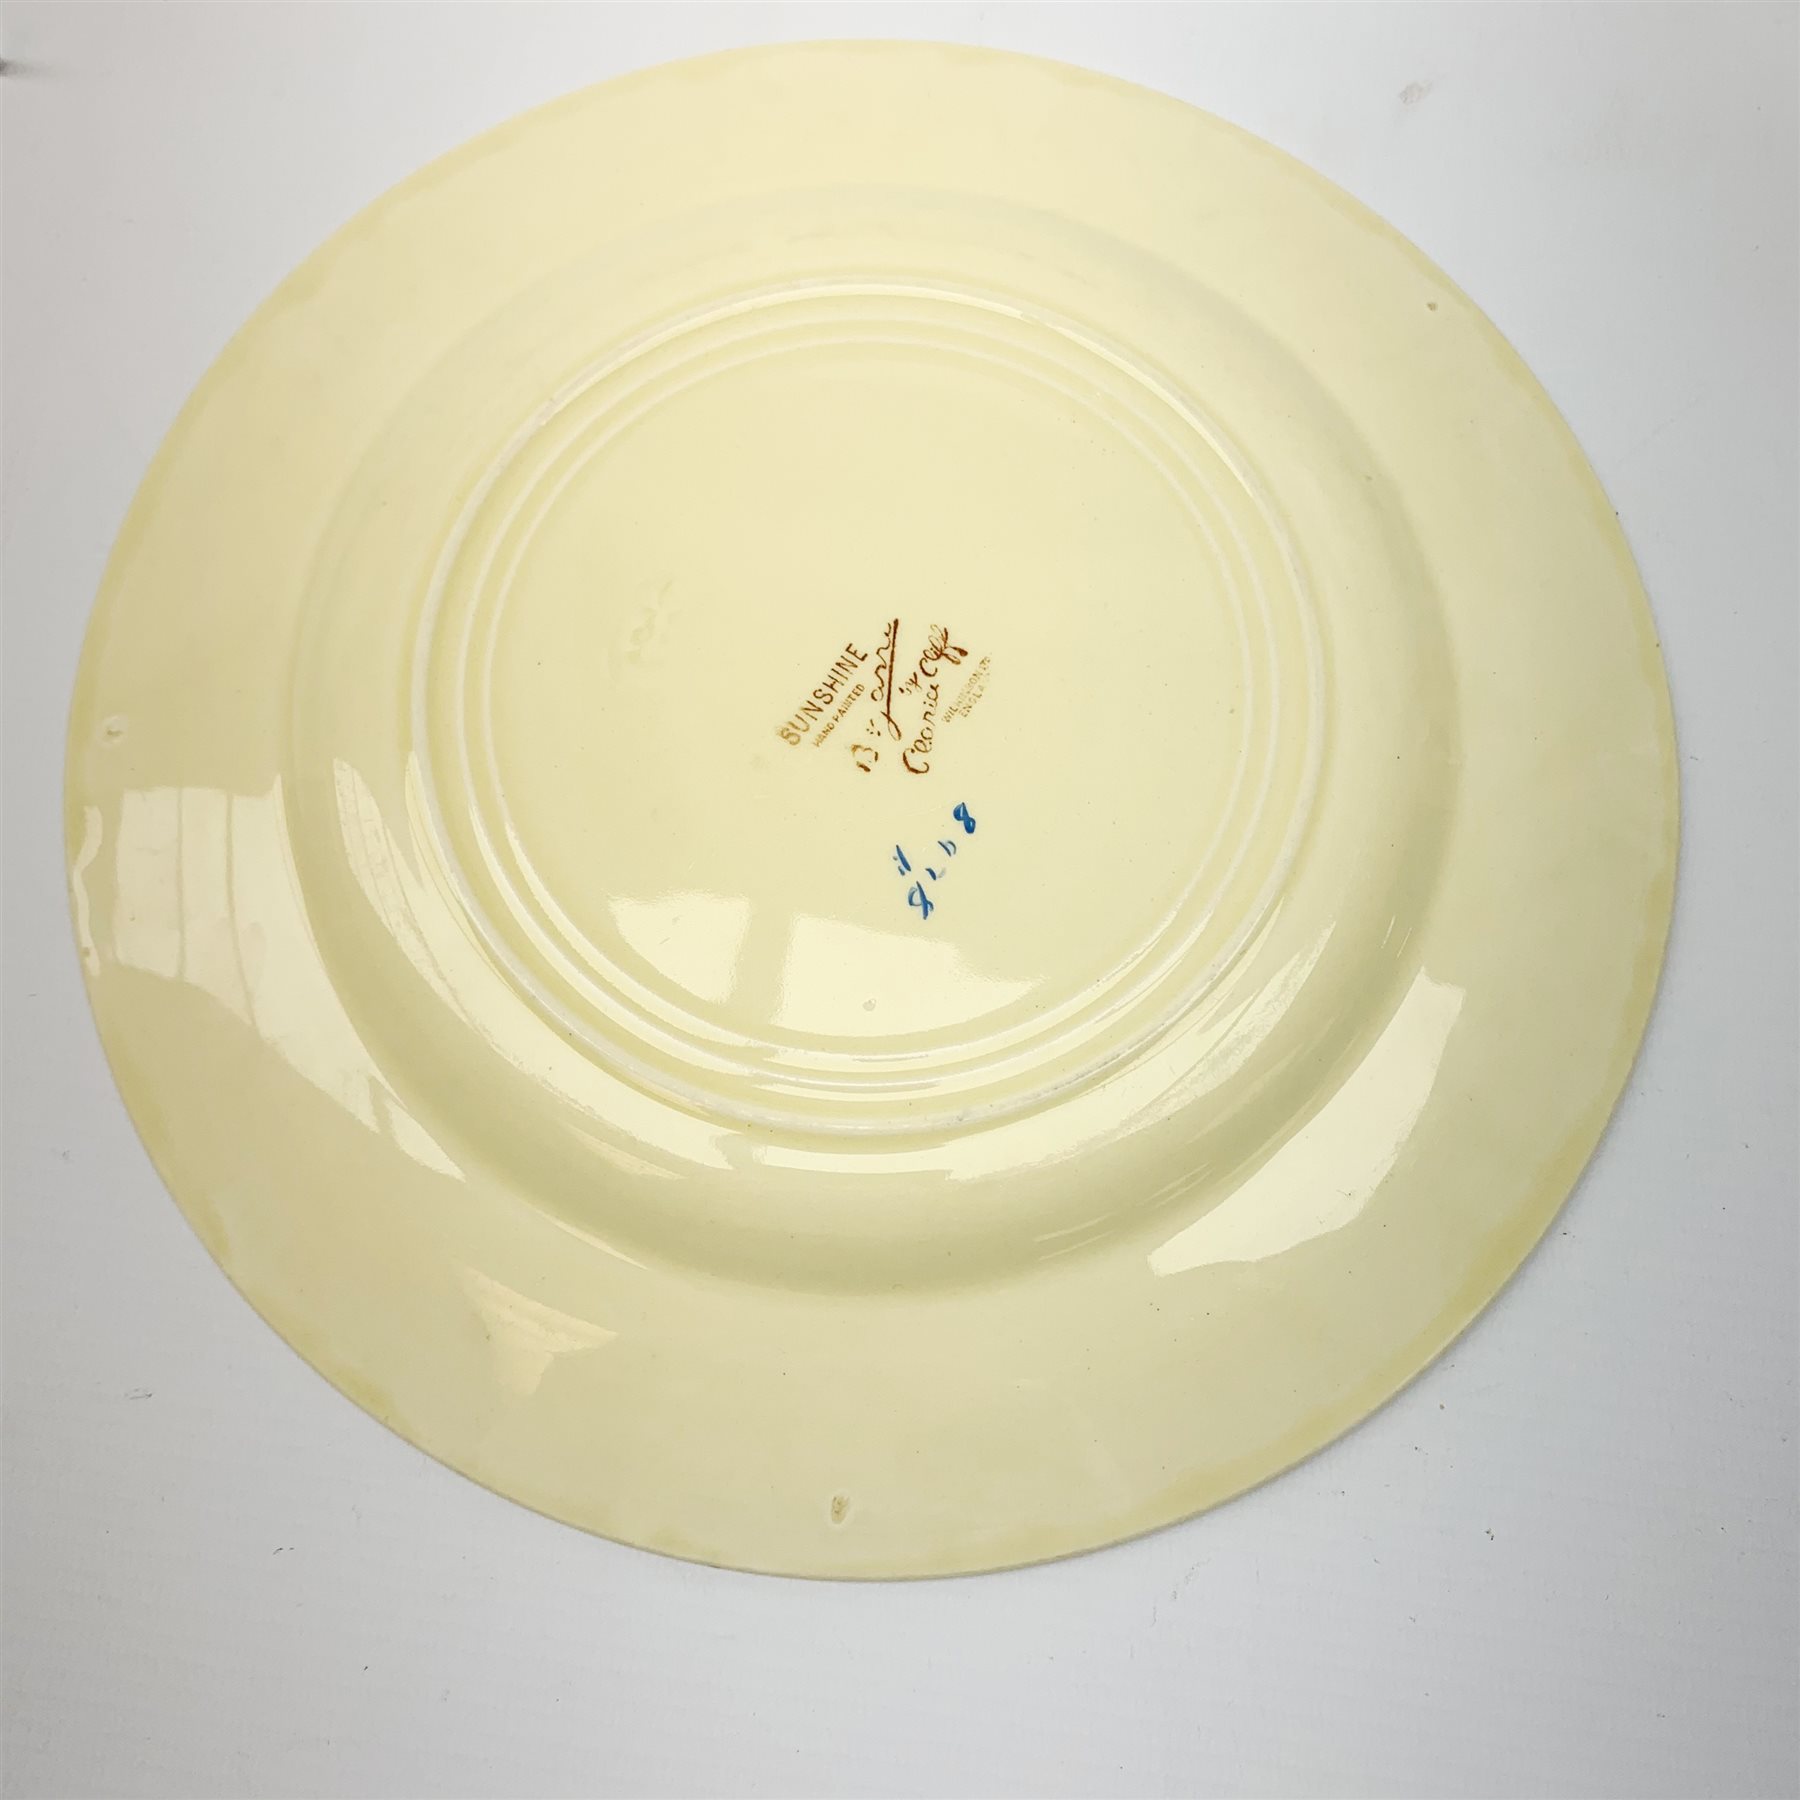 A Clarice Cliff Bizarre by Wilkinson Limited dinner plate, trio and cup in the Sunshine pattern. (5) - Image 4 of 4